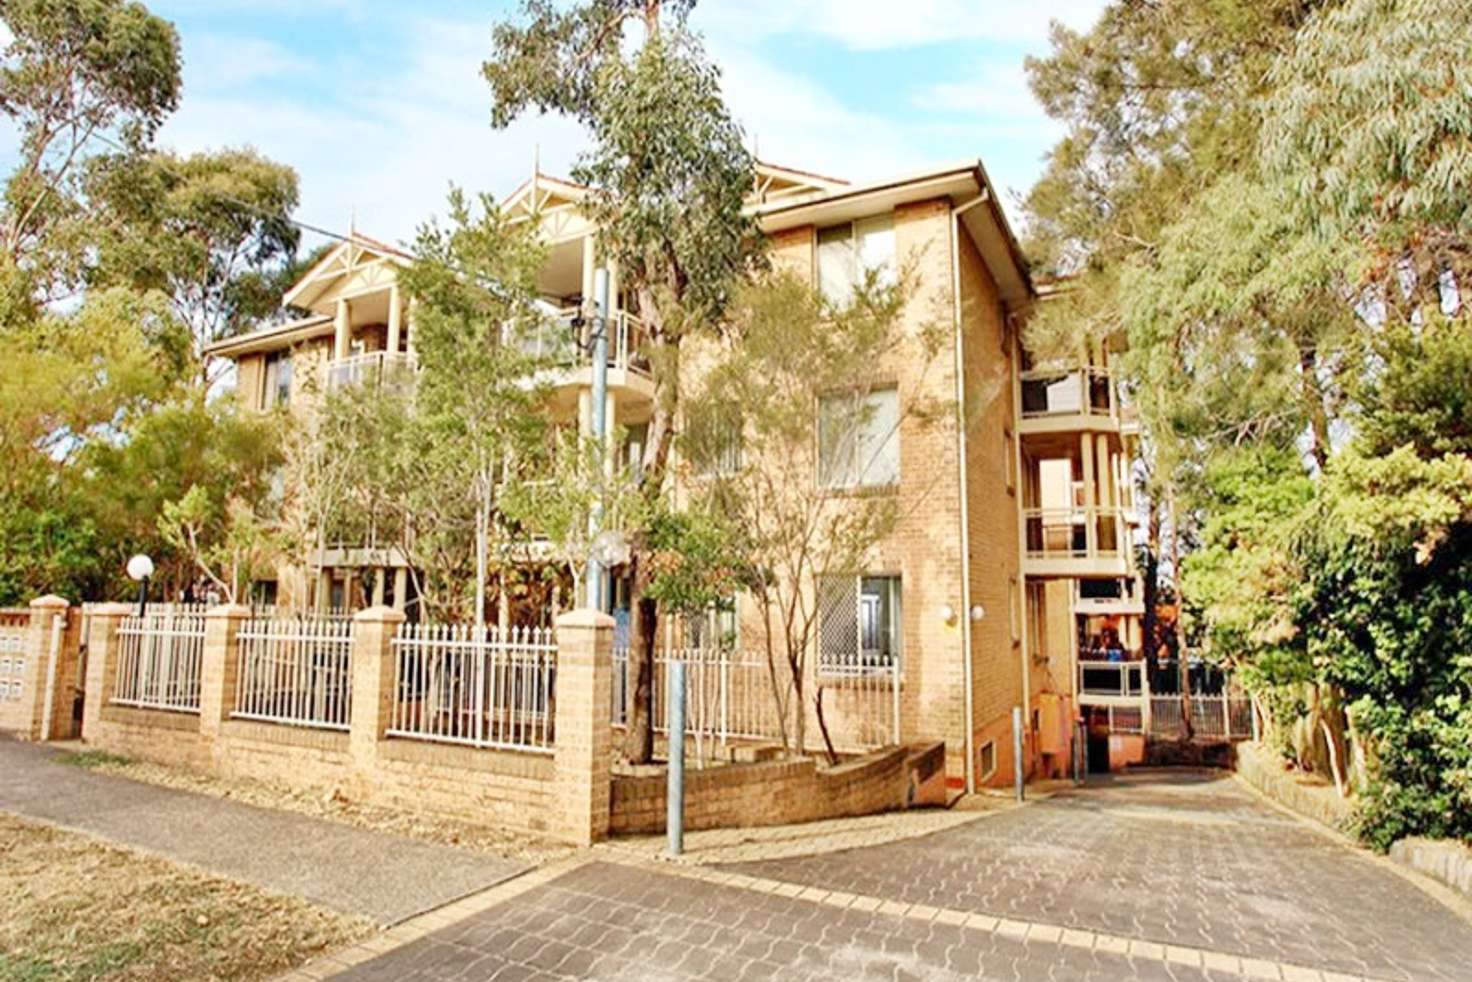 Main view of Homely house listing, 15/60-62 Walpole street, merrylands NSW 2160